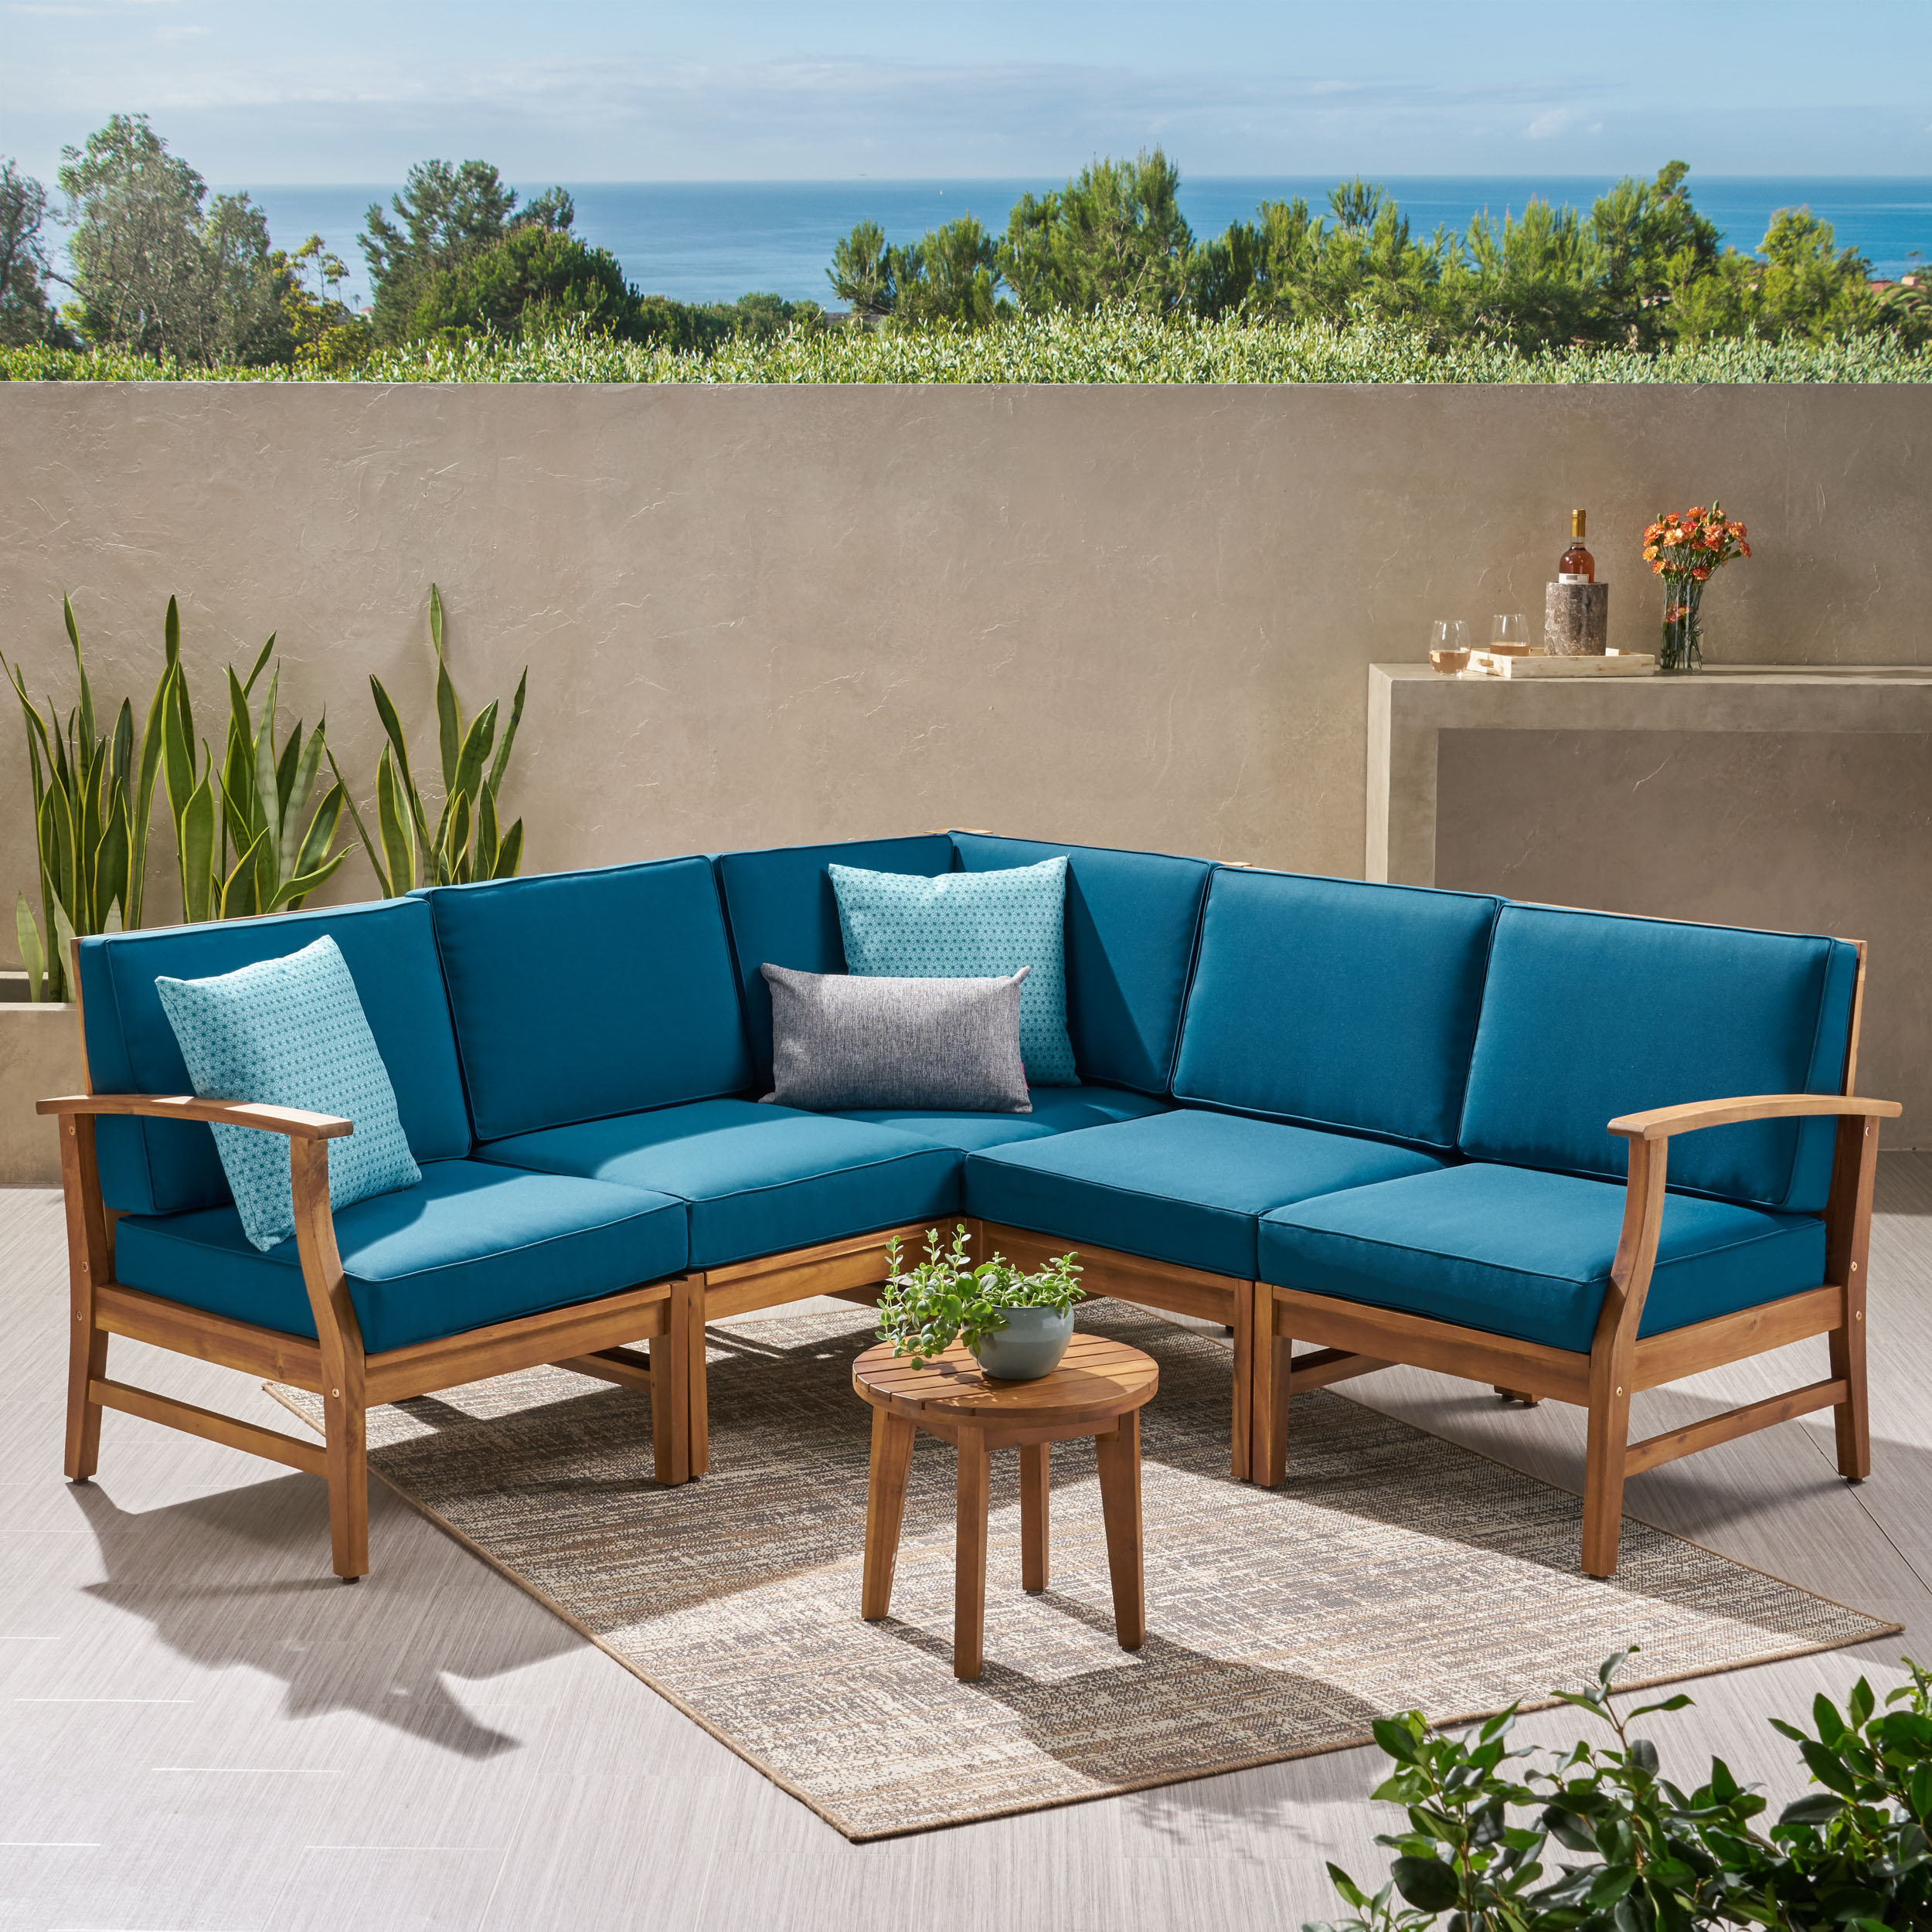 Capri Outdoor 5 Piece Chat Set With Water Resistant Cushions - Blue